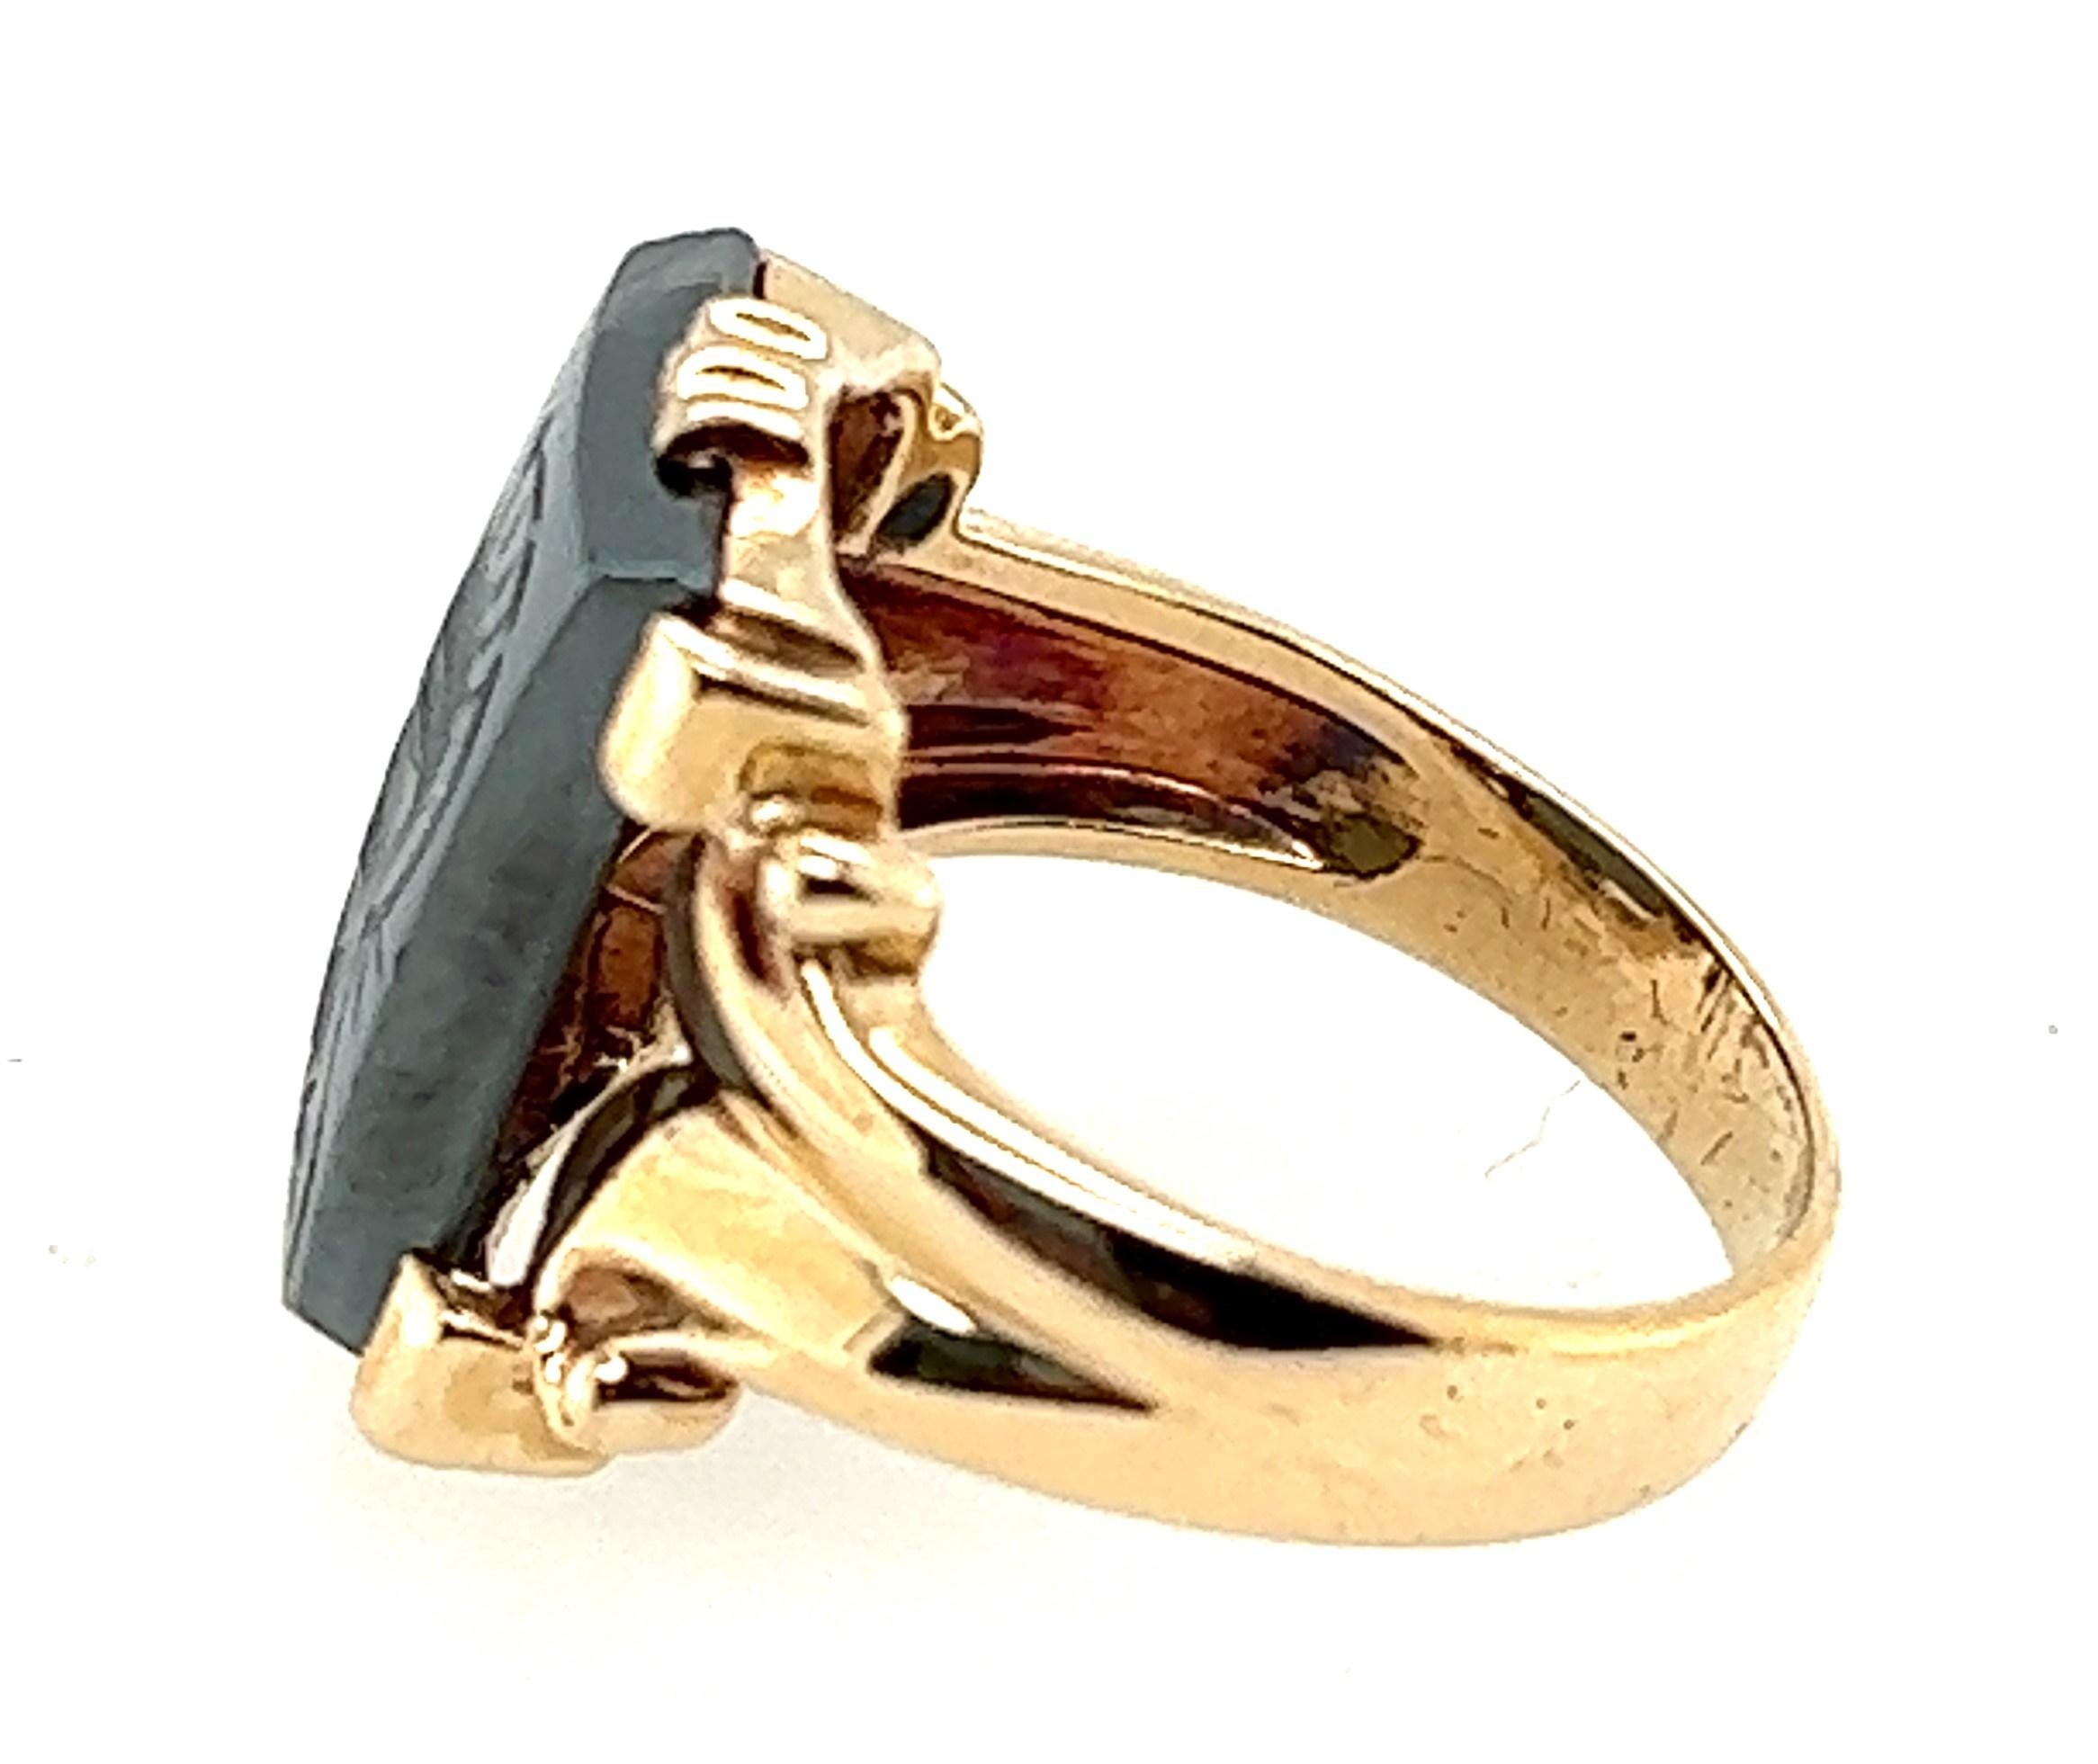 10KT yellow gold carved Intaglio Hematite ring. The carving is a helmeted soldier, 

The hematite measures 9/16 inches high by 7/16 inches wide. 

Finger size 8.75